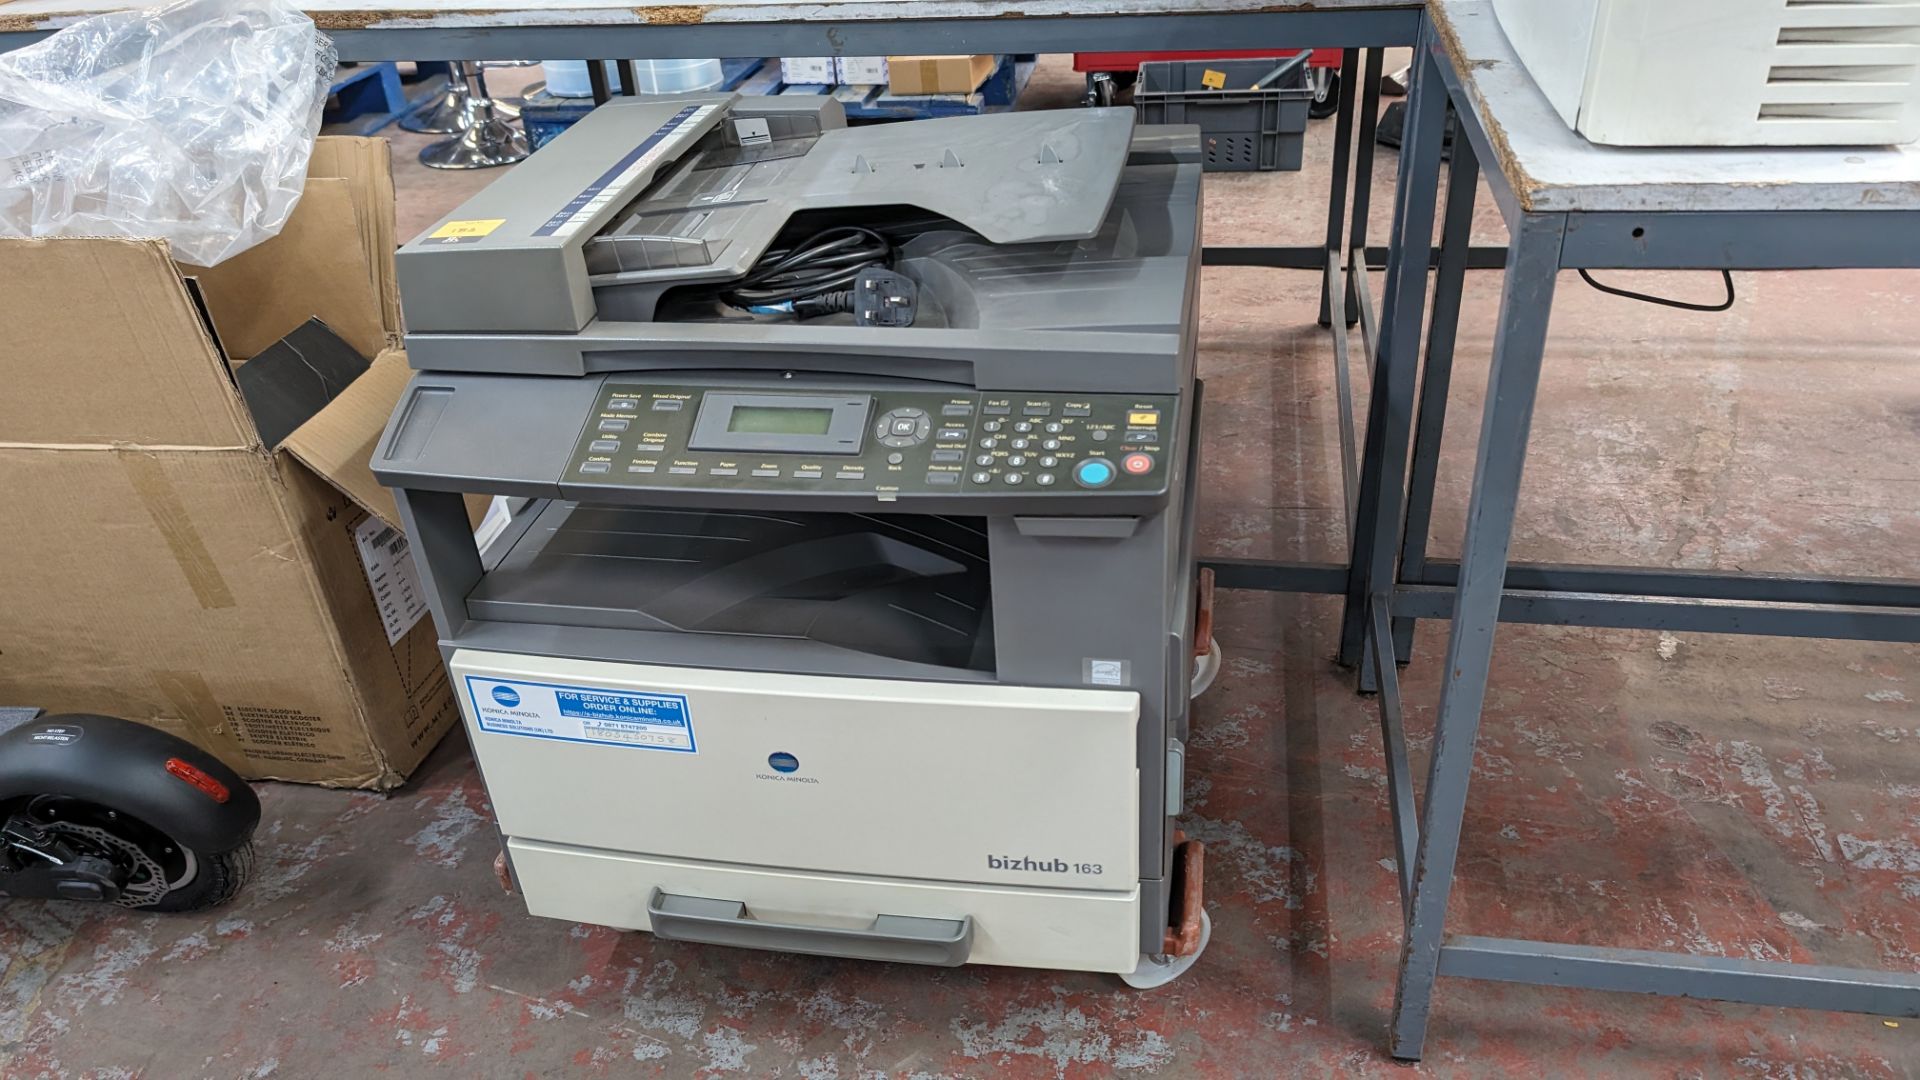 Konica Minolta Bizhub 163 copier. NB the wheeled dolly the copier is sat on is excluded - Image 2 of 9